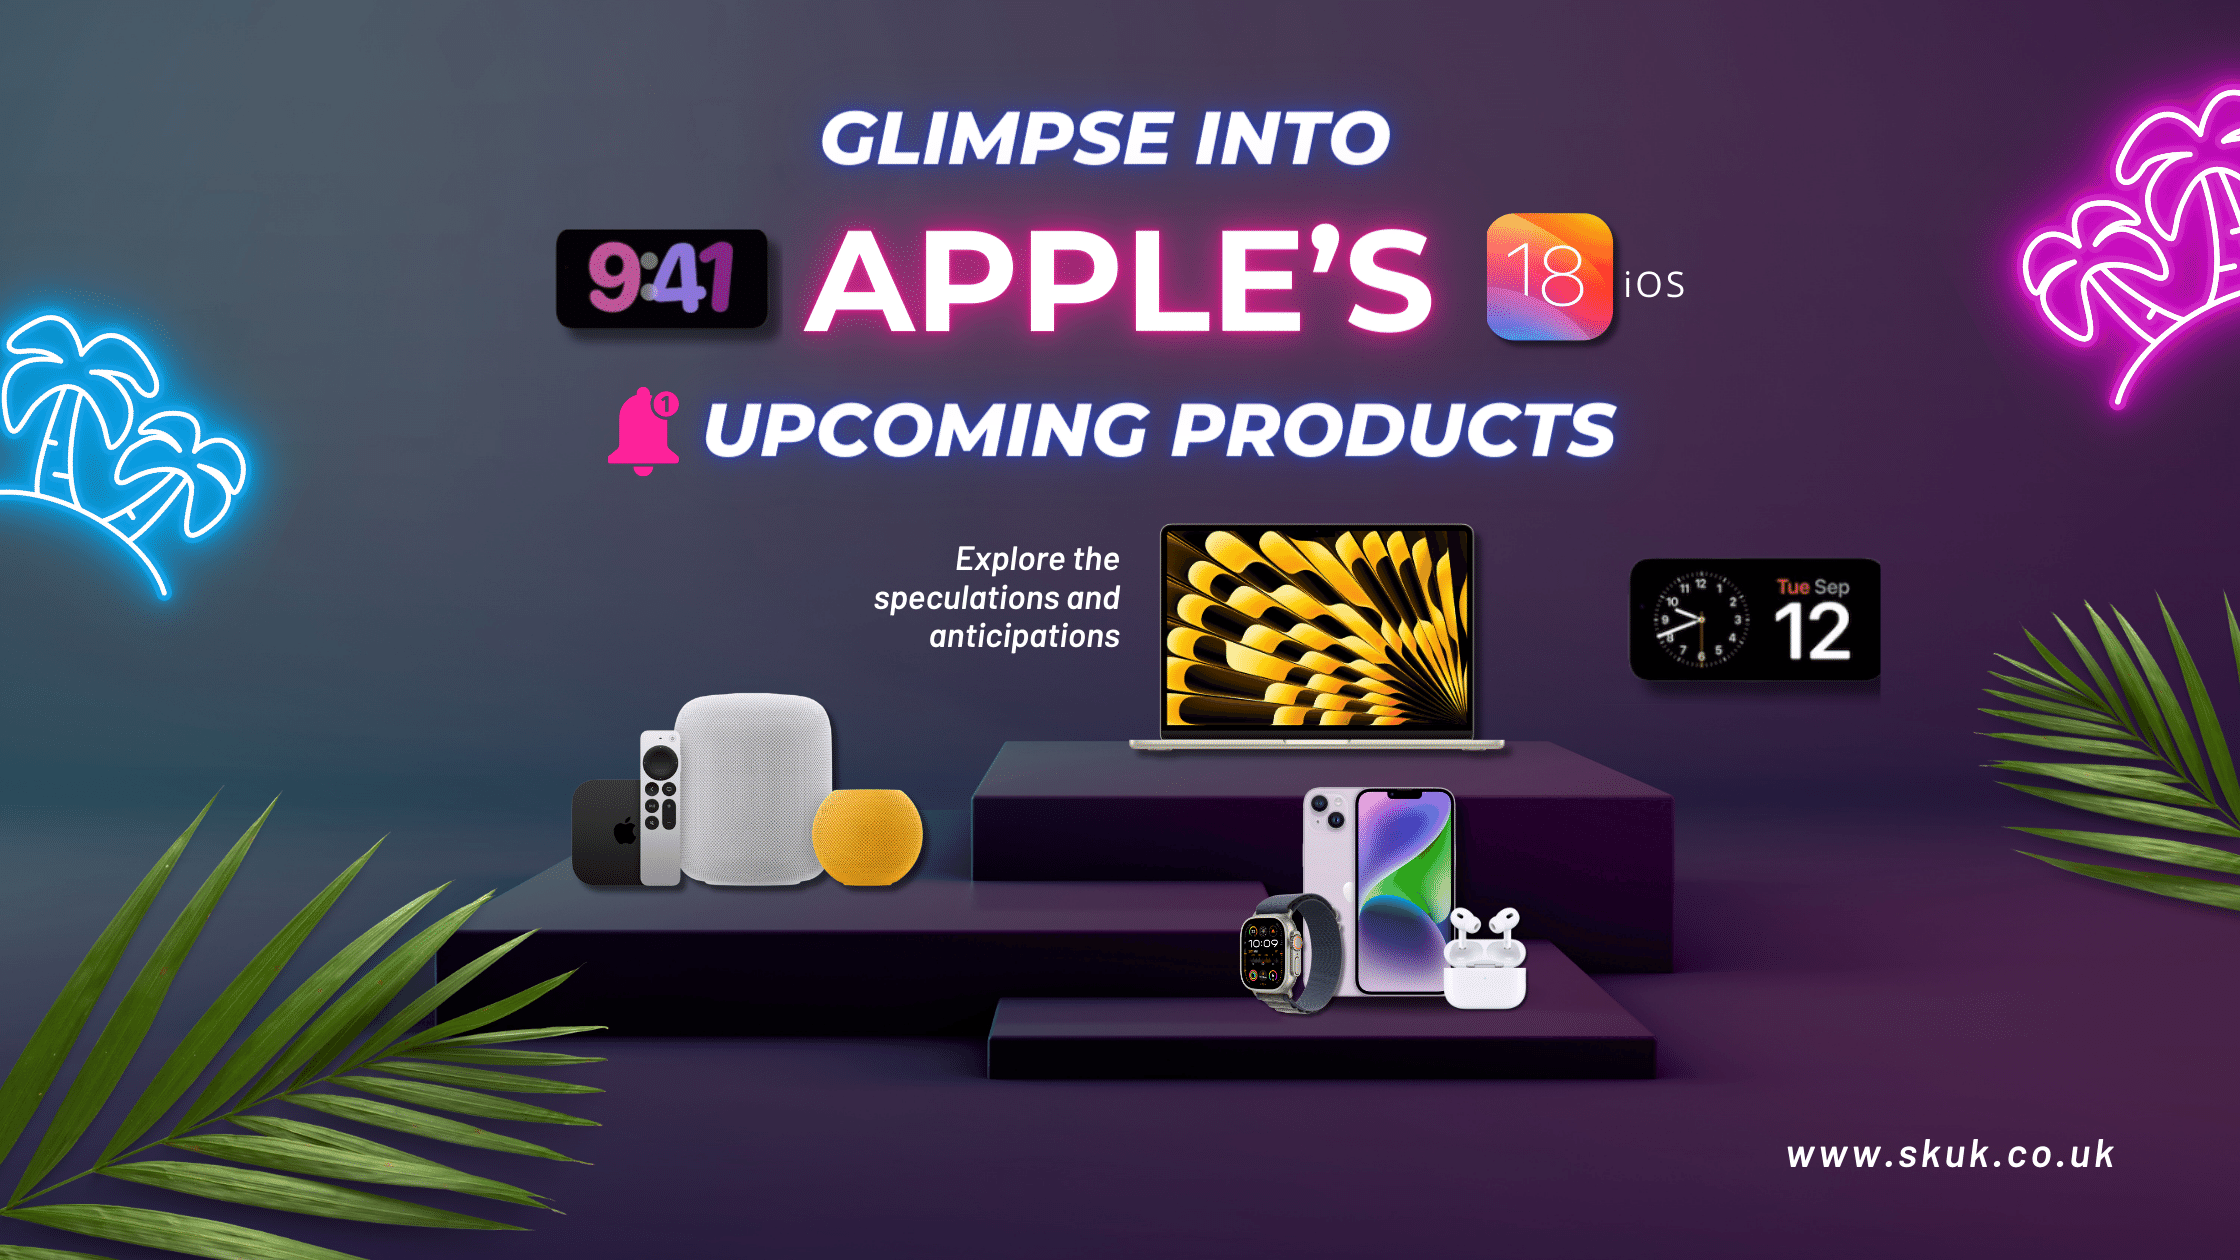 Exploring Apple’s Upcoming Product Lineup